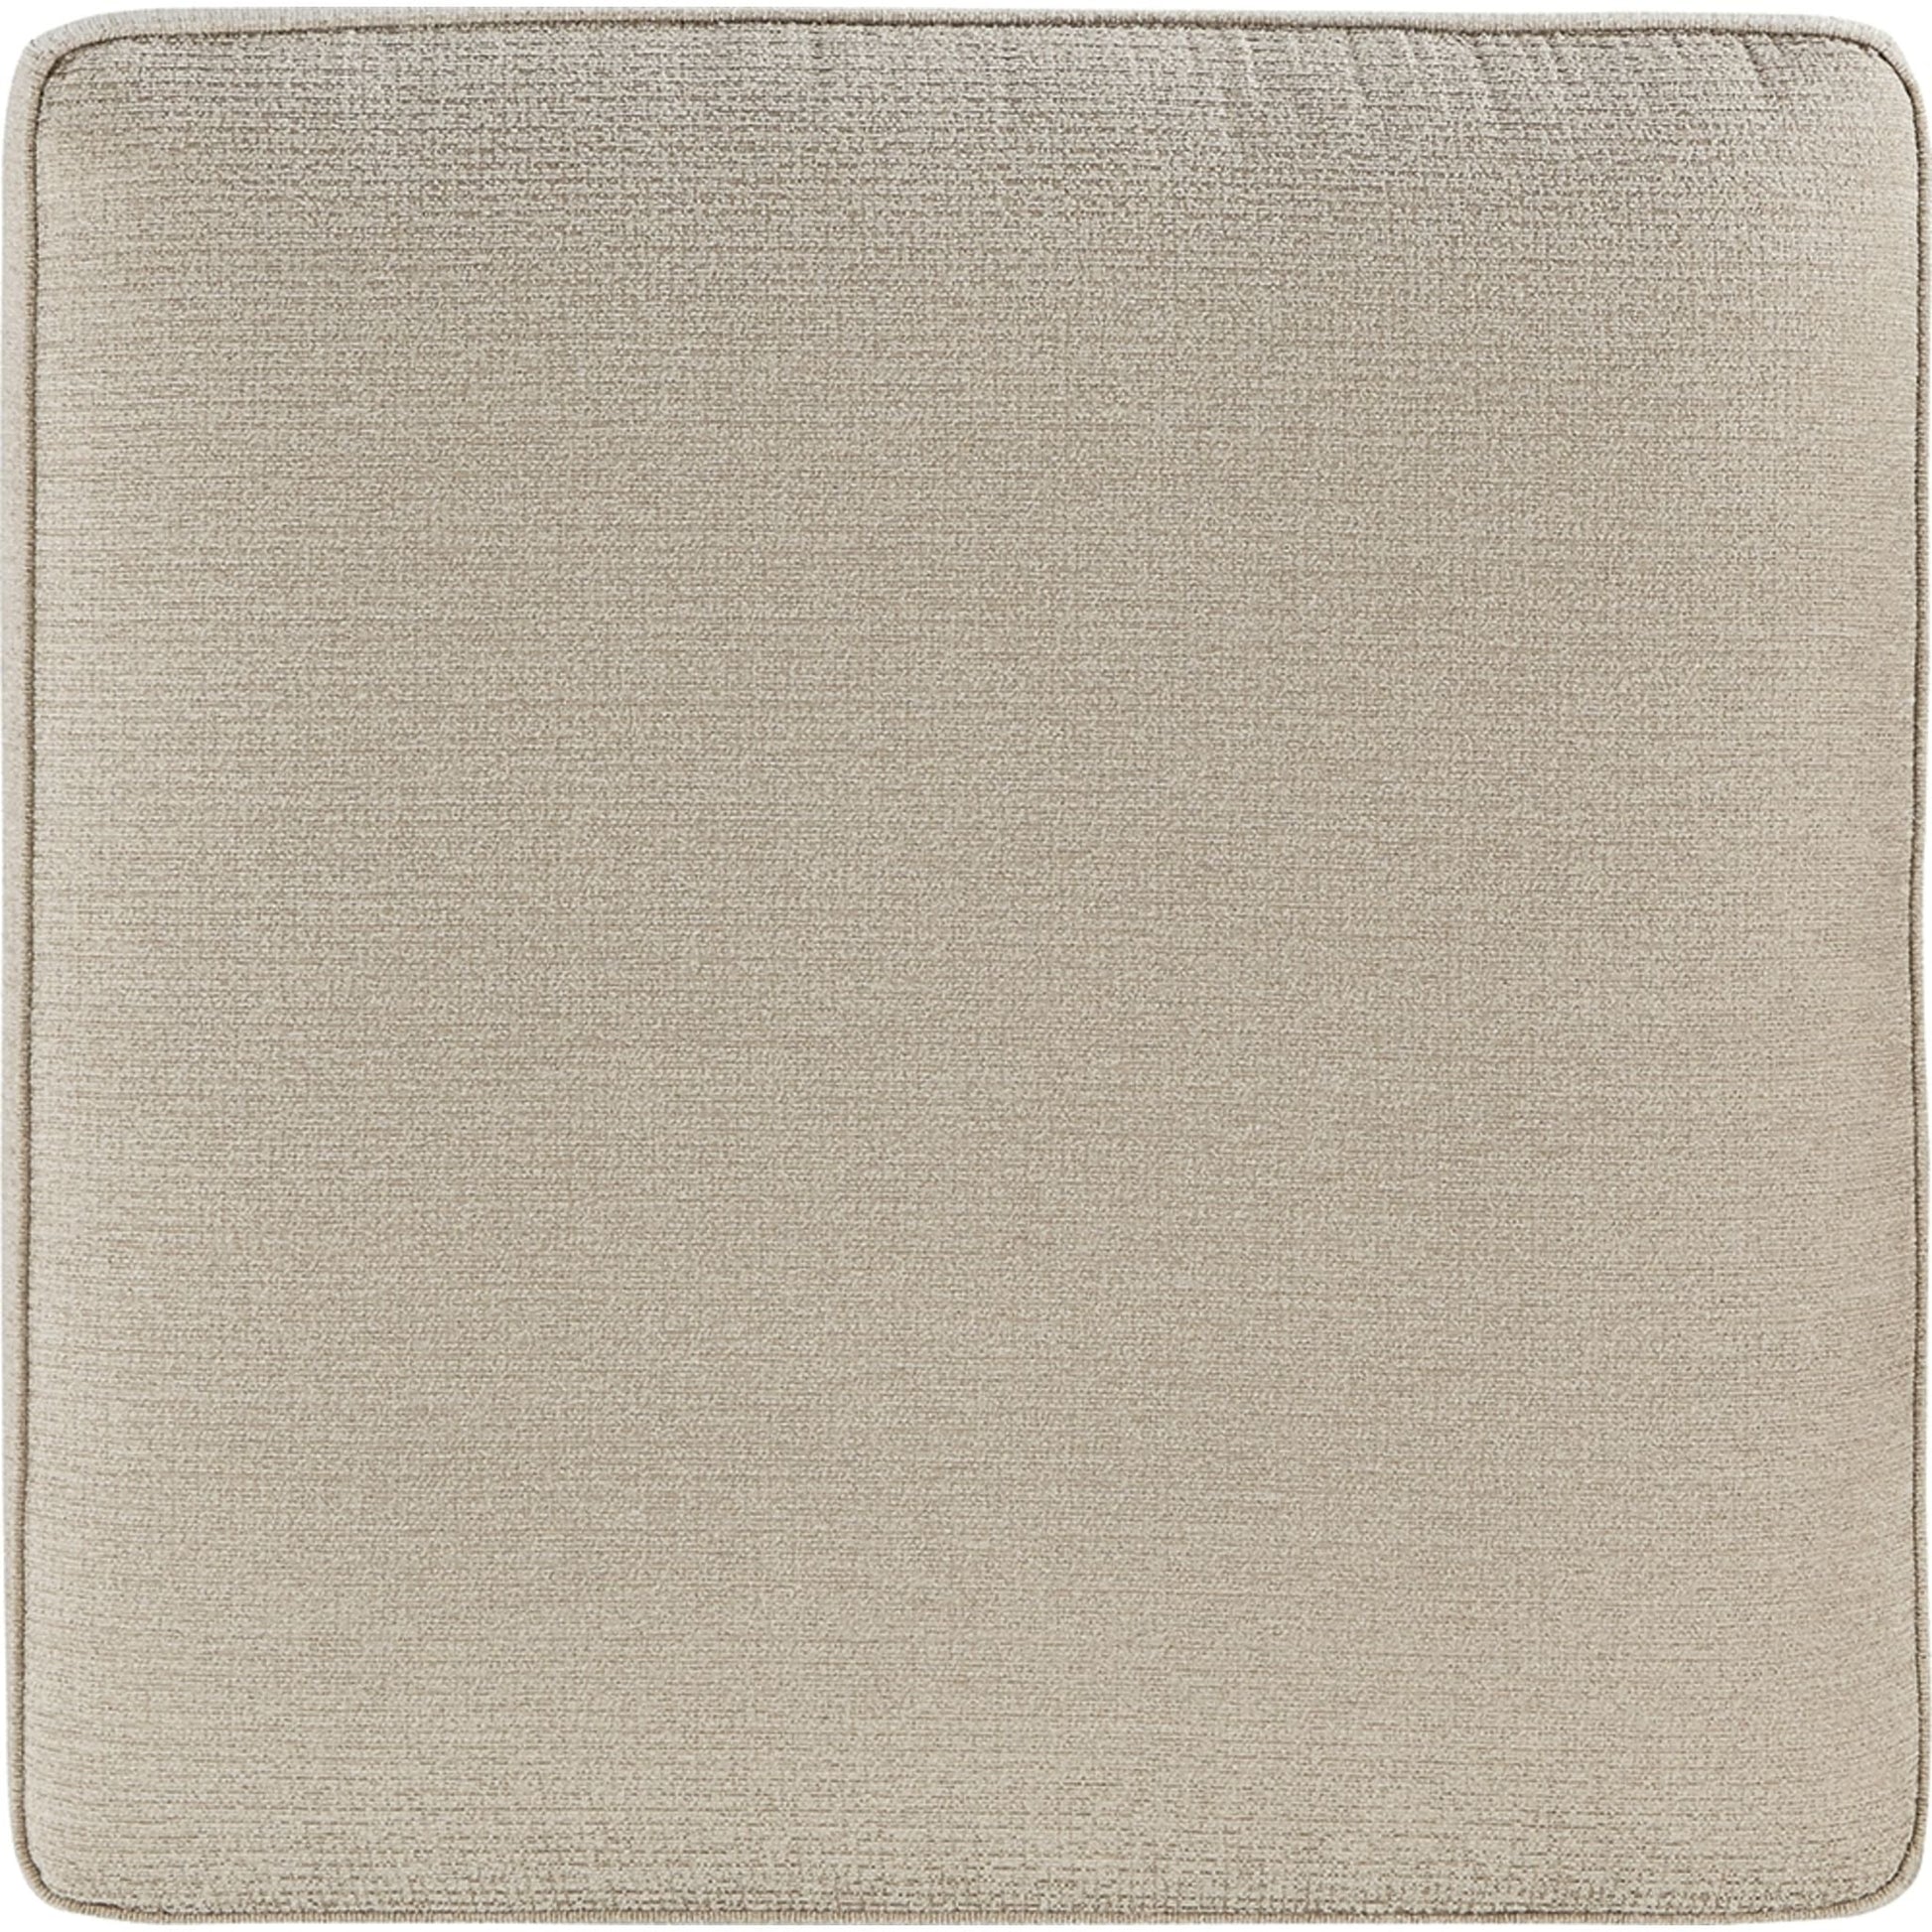 Decelle Oversized Accent Ottoman - Putty